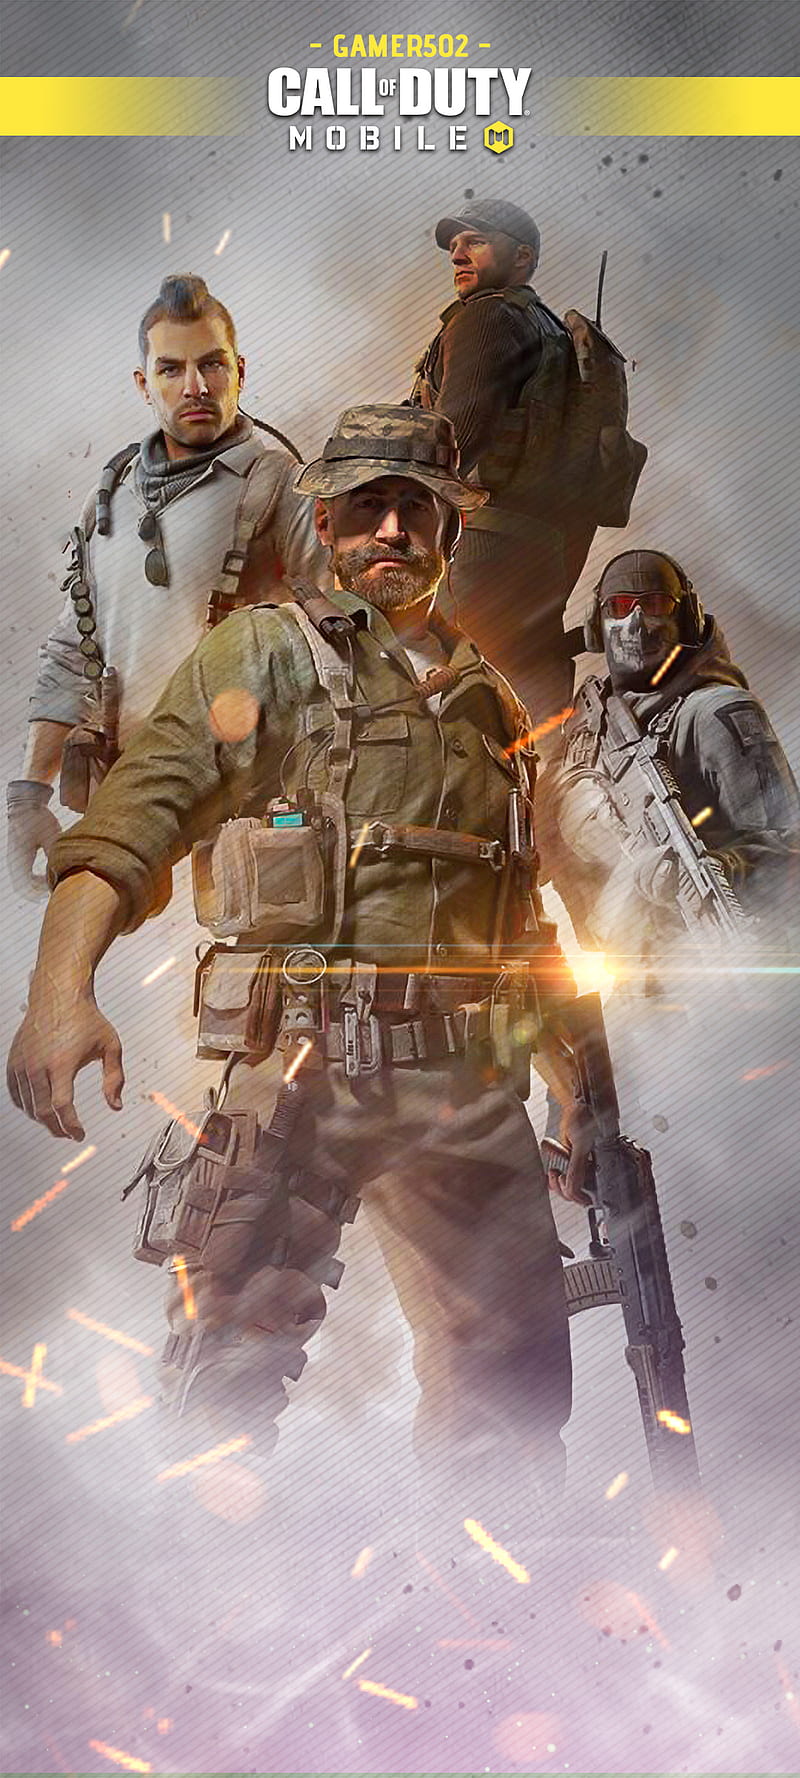 Call of Duty Mobile Wallpaper 4K, Android games, iOS Games